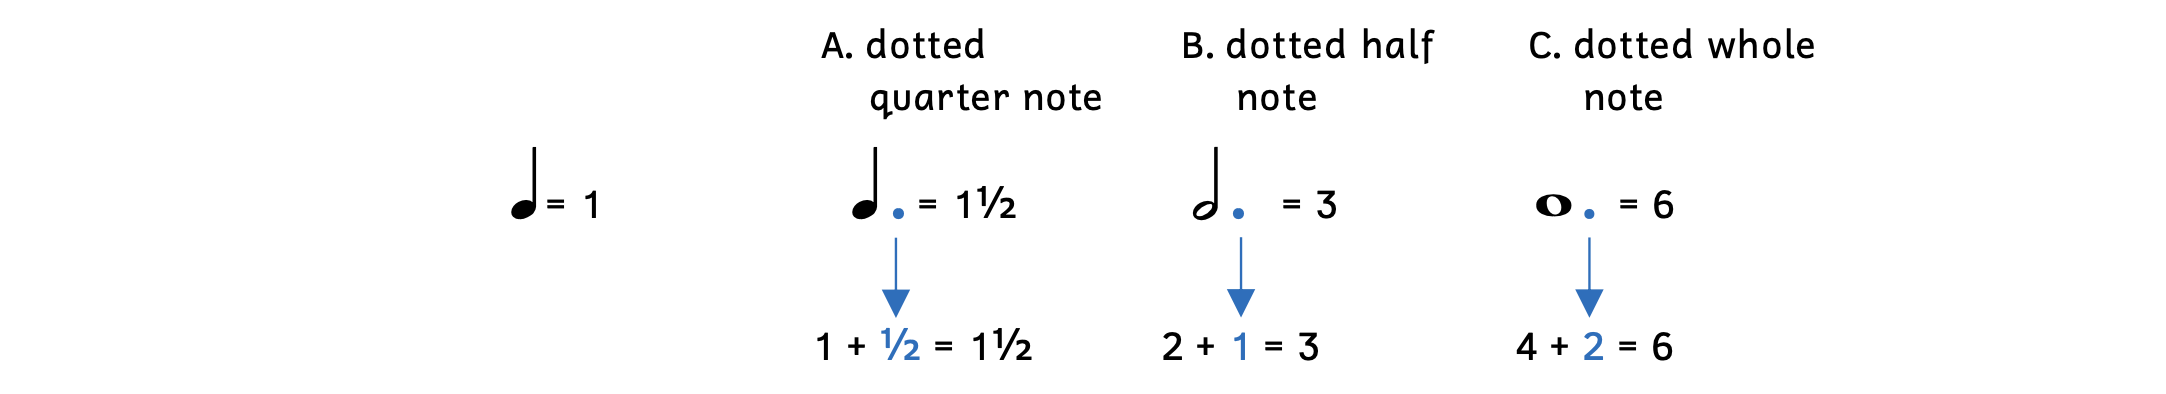 Explanation of how dots work. A quarter note equals one. Example A shows that a dotted quarter note is equal to 1 and a half because the dot is worth half of 1, which is half. 1 plus half equals 1 and a half. Example B shows that a dotted half note is equal to 3. The whole note is equal to 2 and the dot is worth half of two, which is 1. 2 plus 1 equals 3. Example C shows that the dotted whole note is worth 6. The whole note is worth 4 and the dot is worth half of 4, which is 2. 4 plus 2 equals 6.